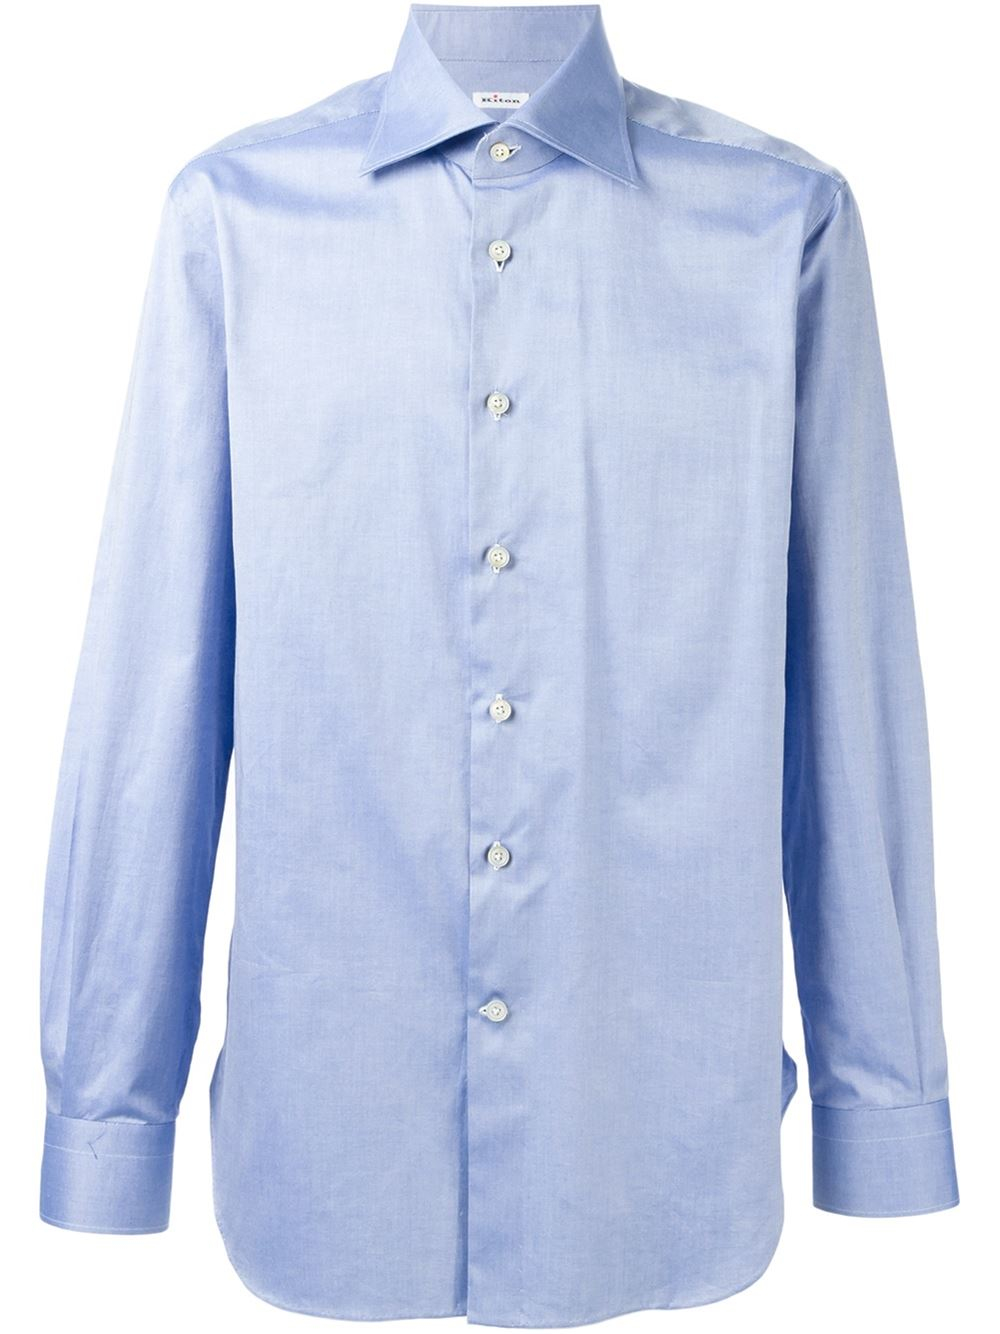 Kiton Classic Shirt in Blue for Men